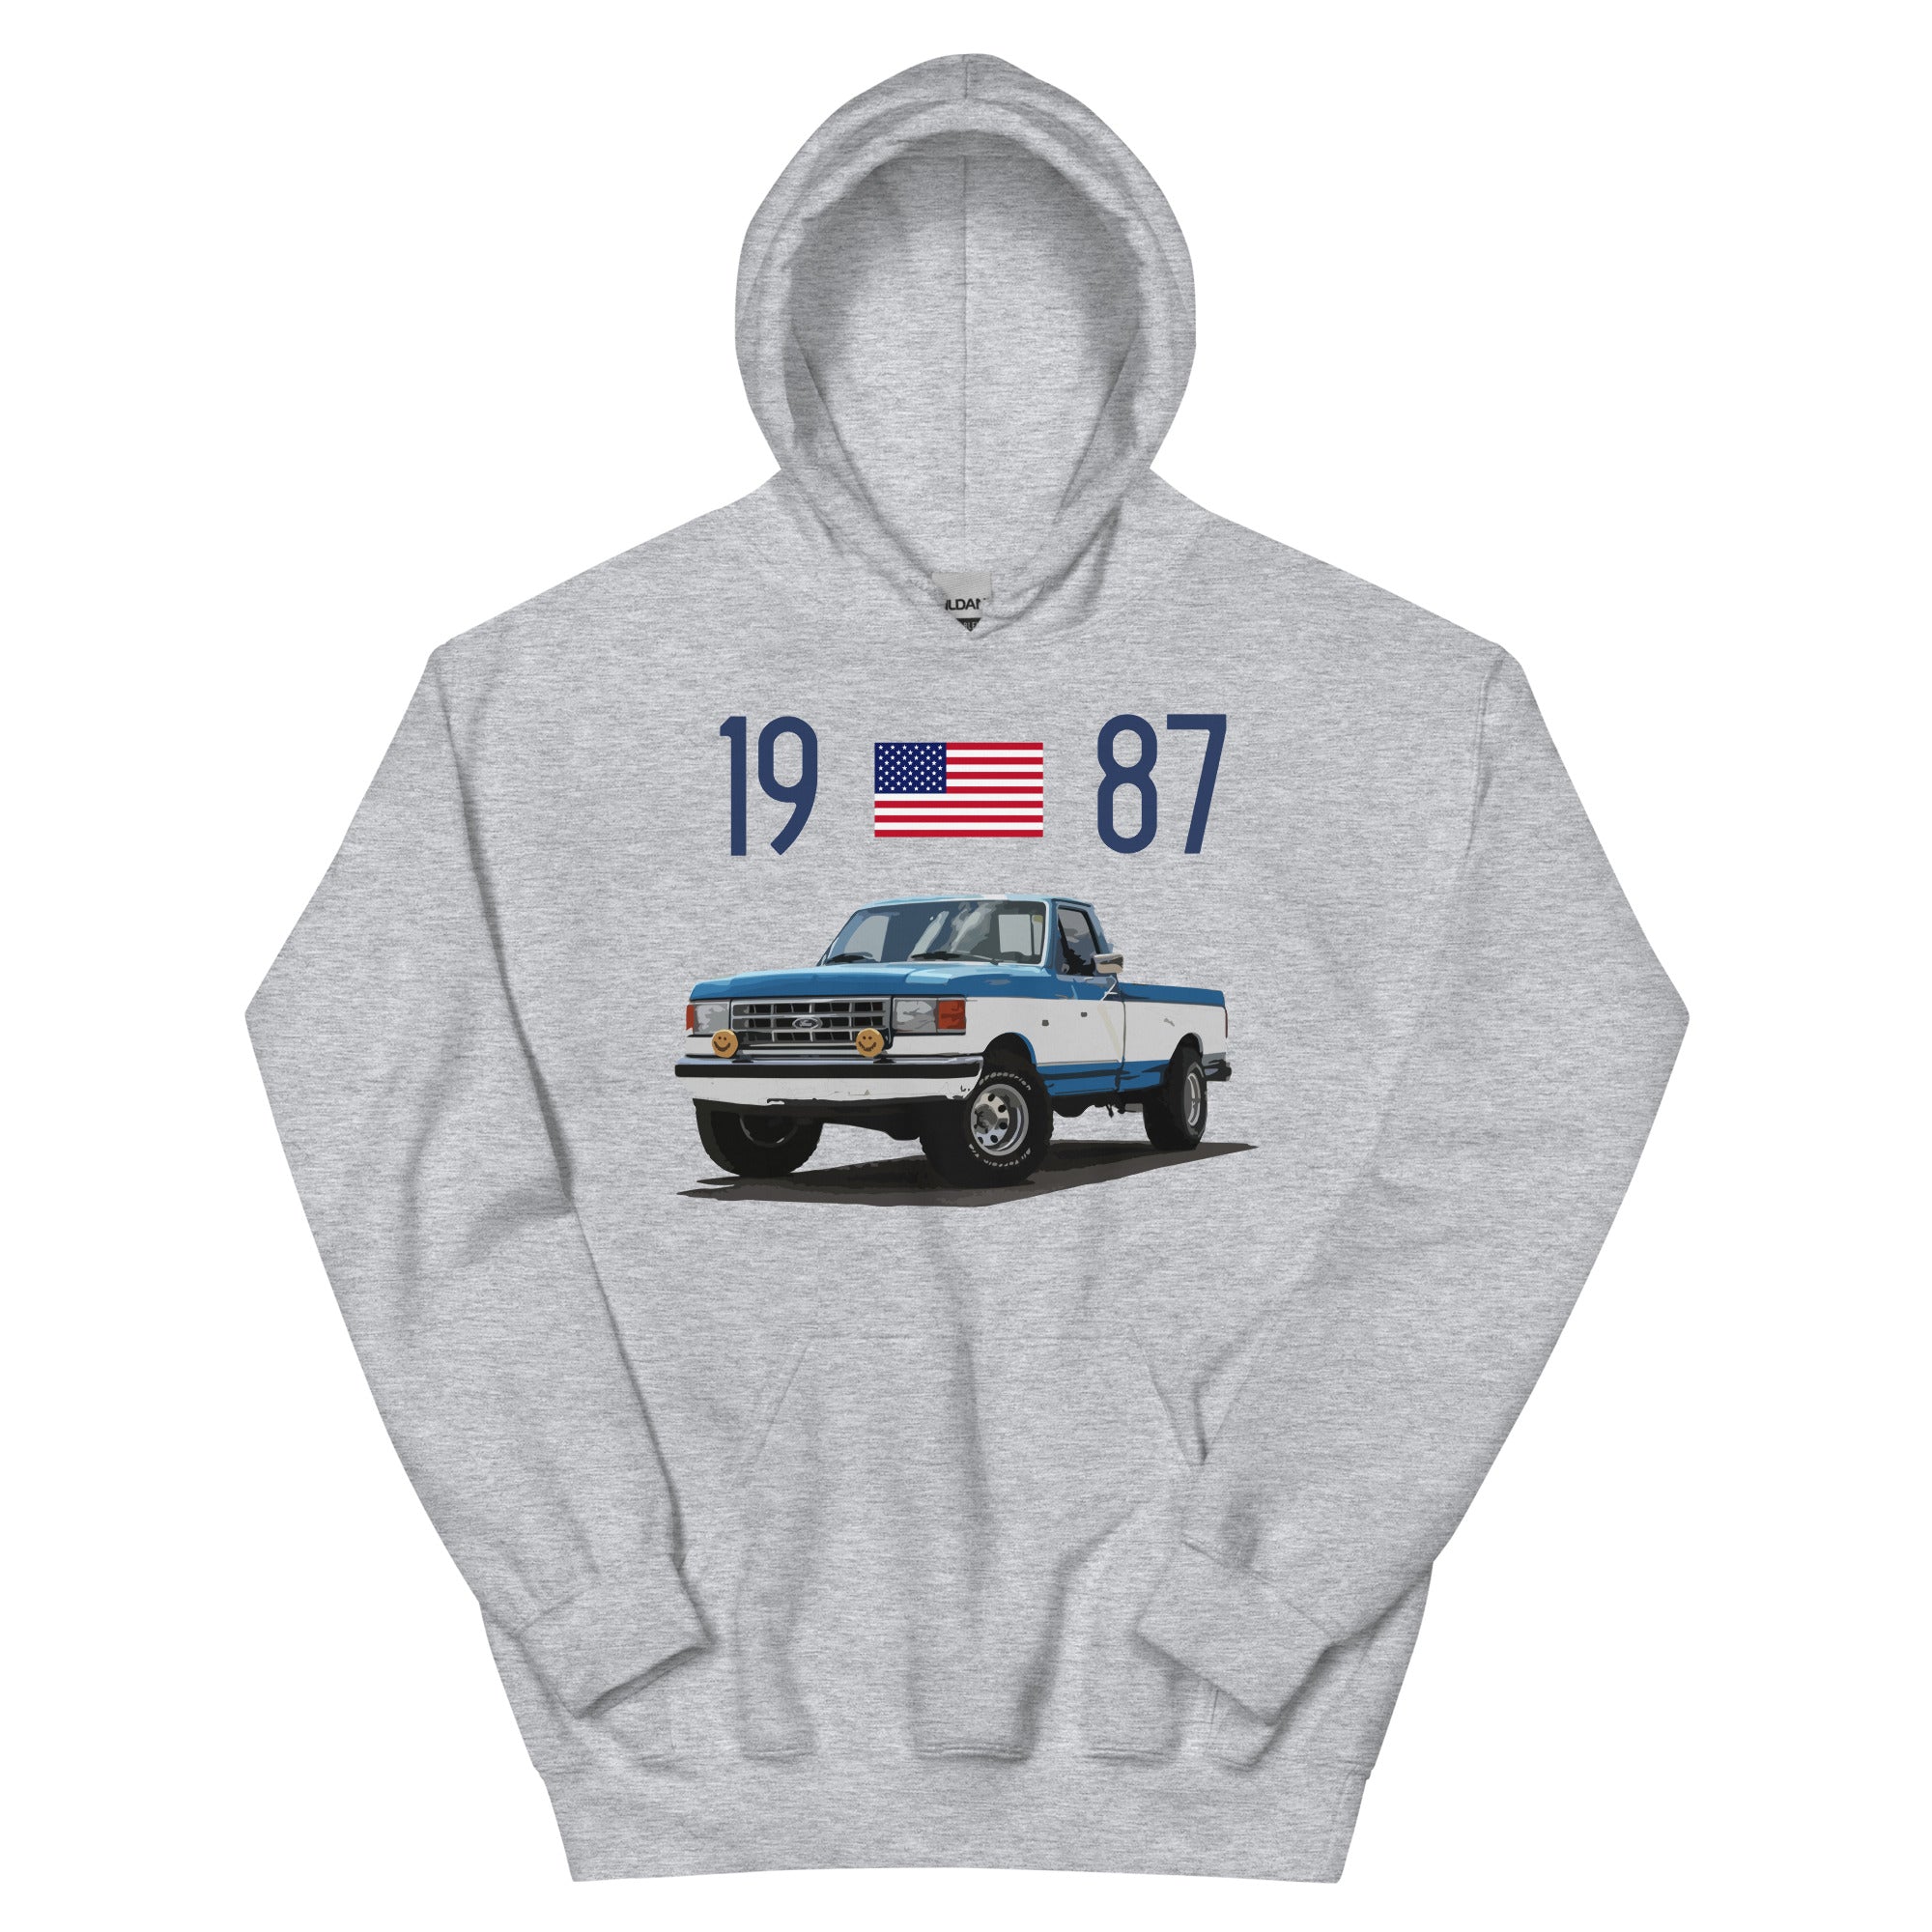 1987 Ford F150 Pickup Truck Owner Gift Unisex Hoodie